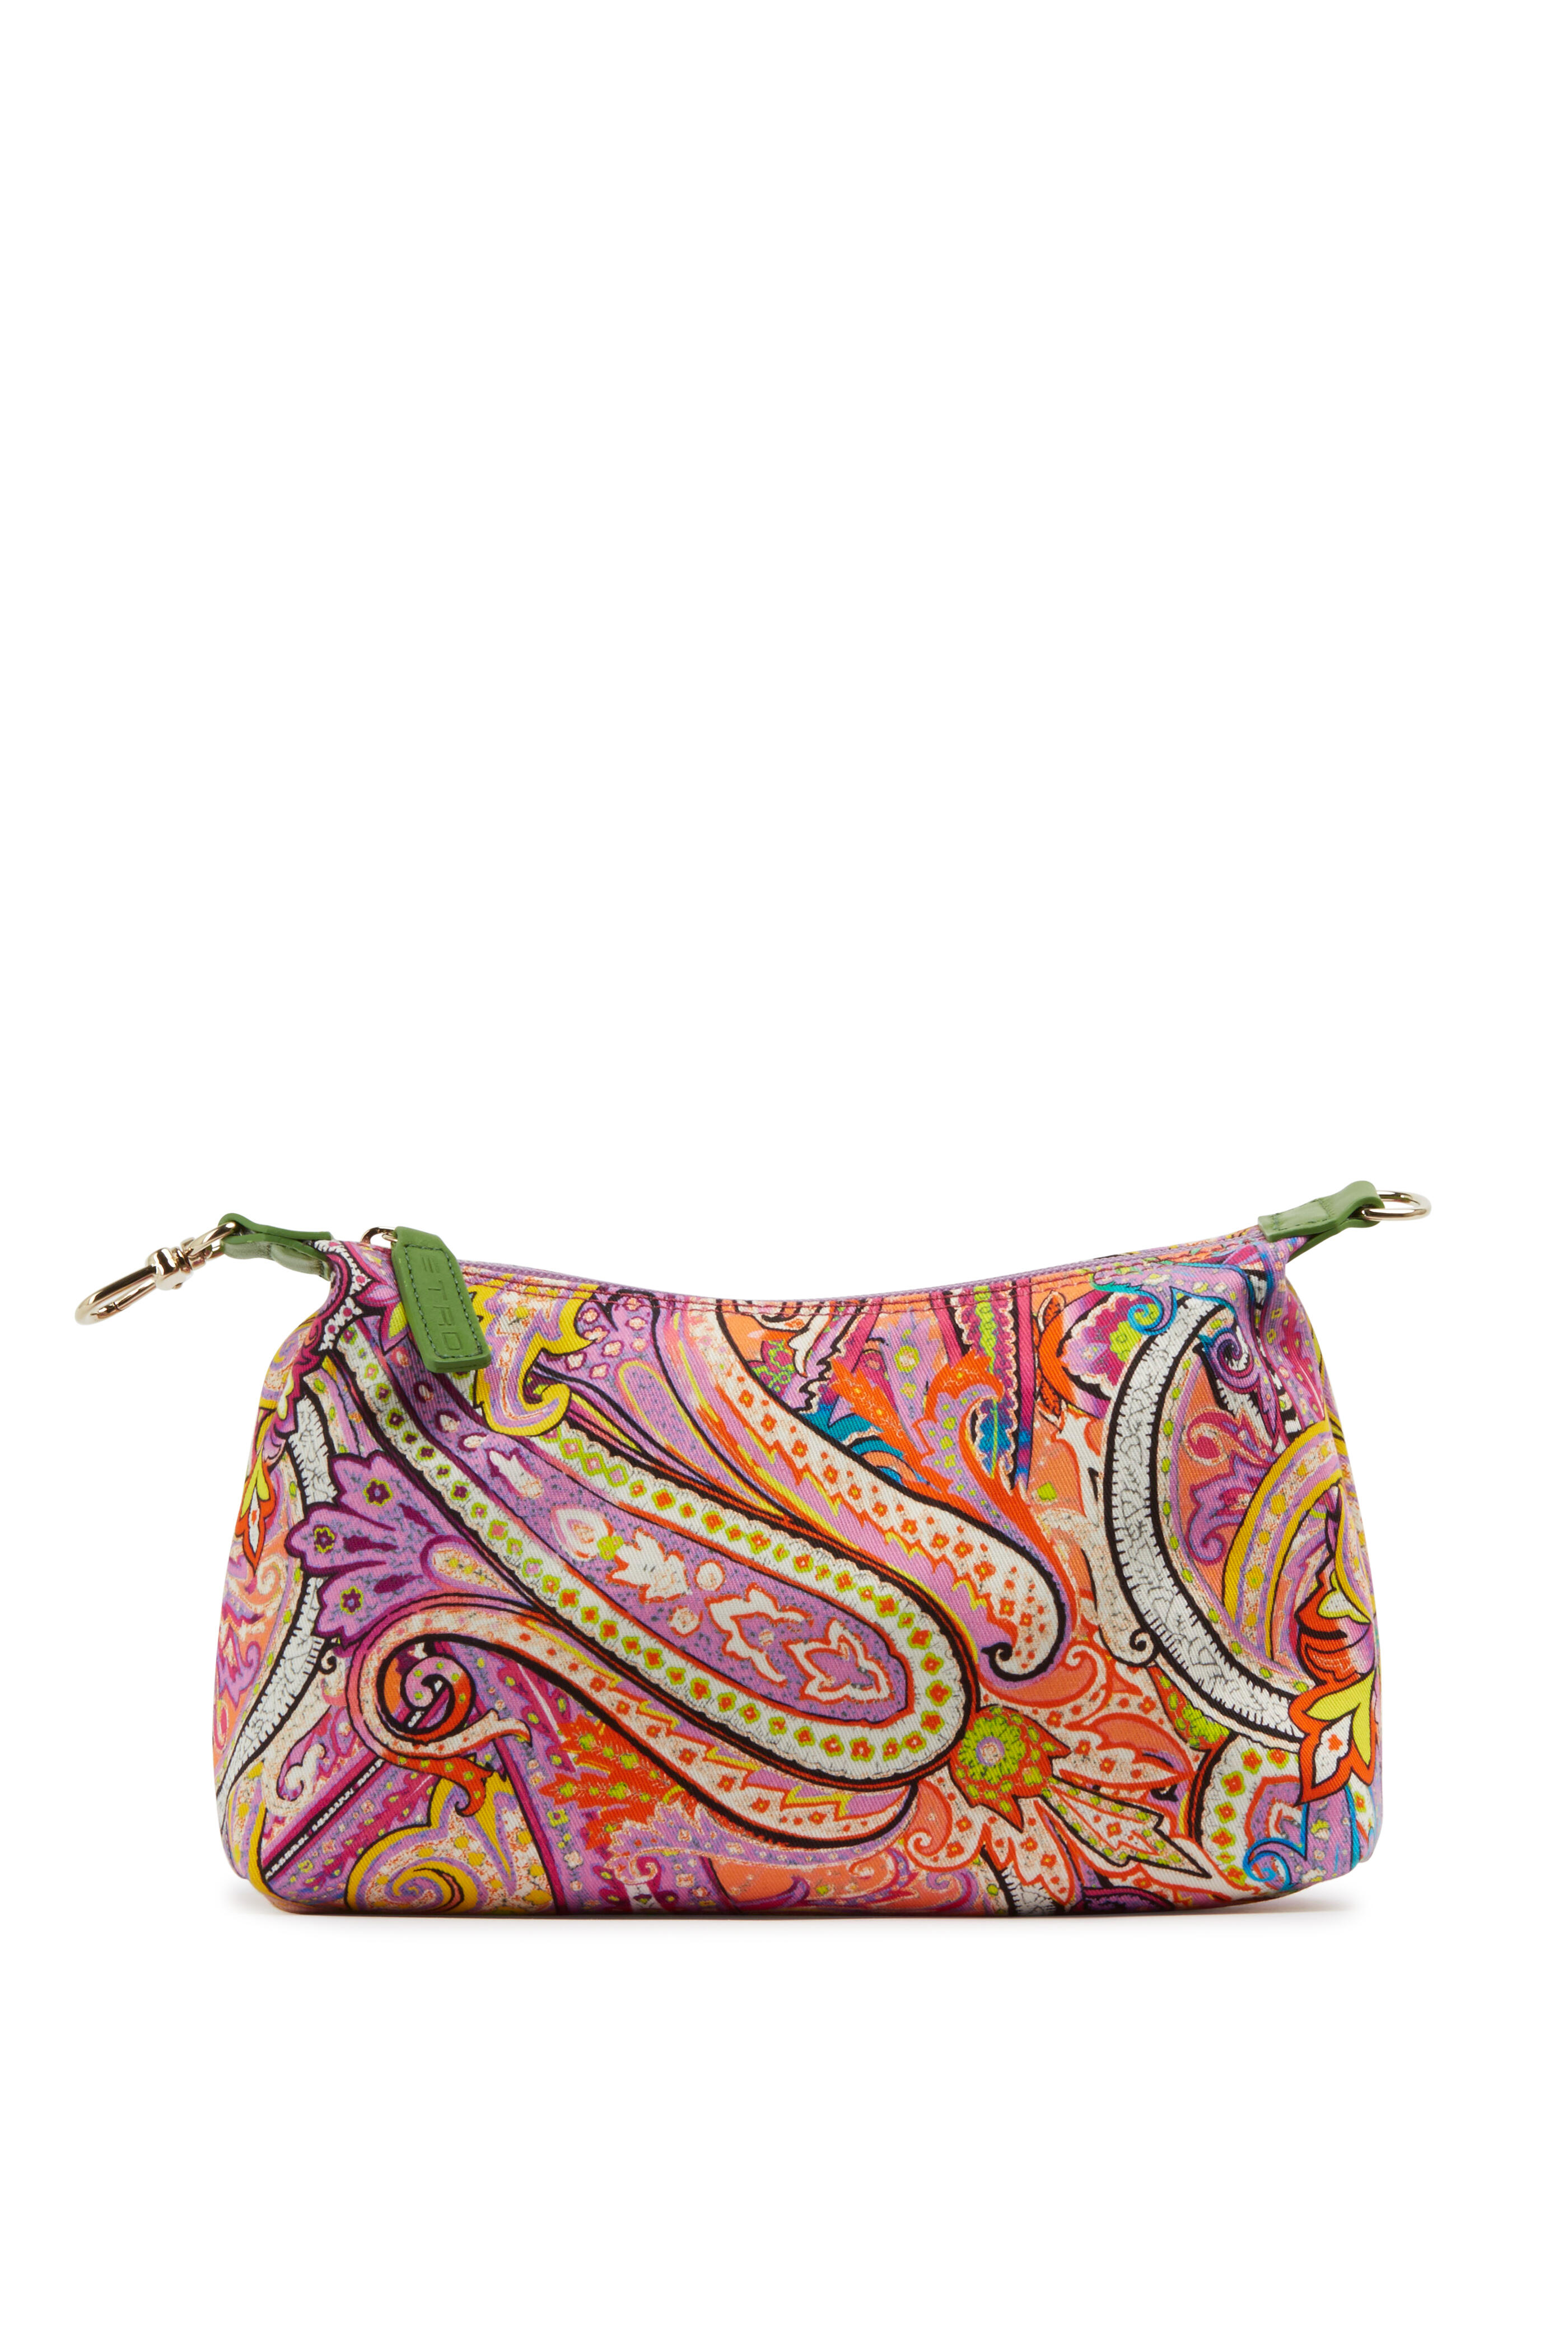 Etro - Multicolored Paisley Canvas Cosmetic Bag | Mitchell Stores